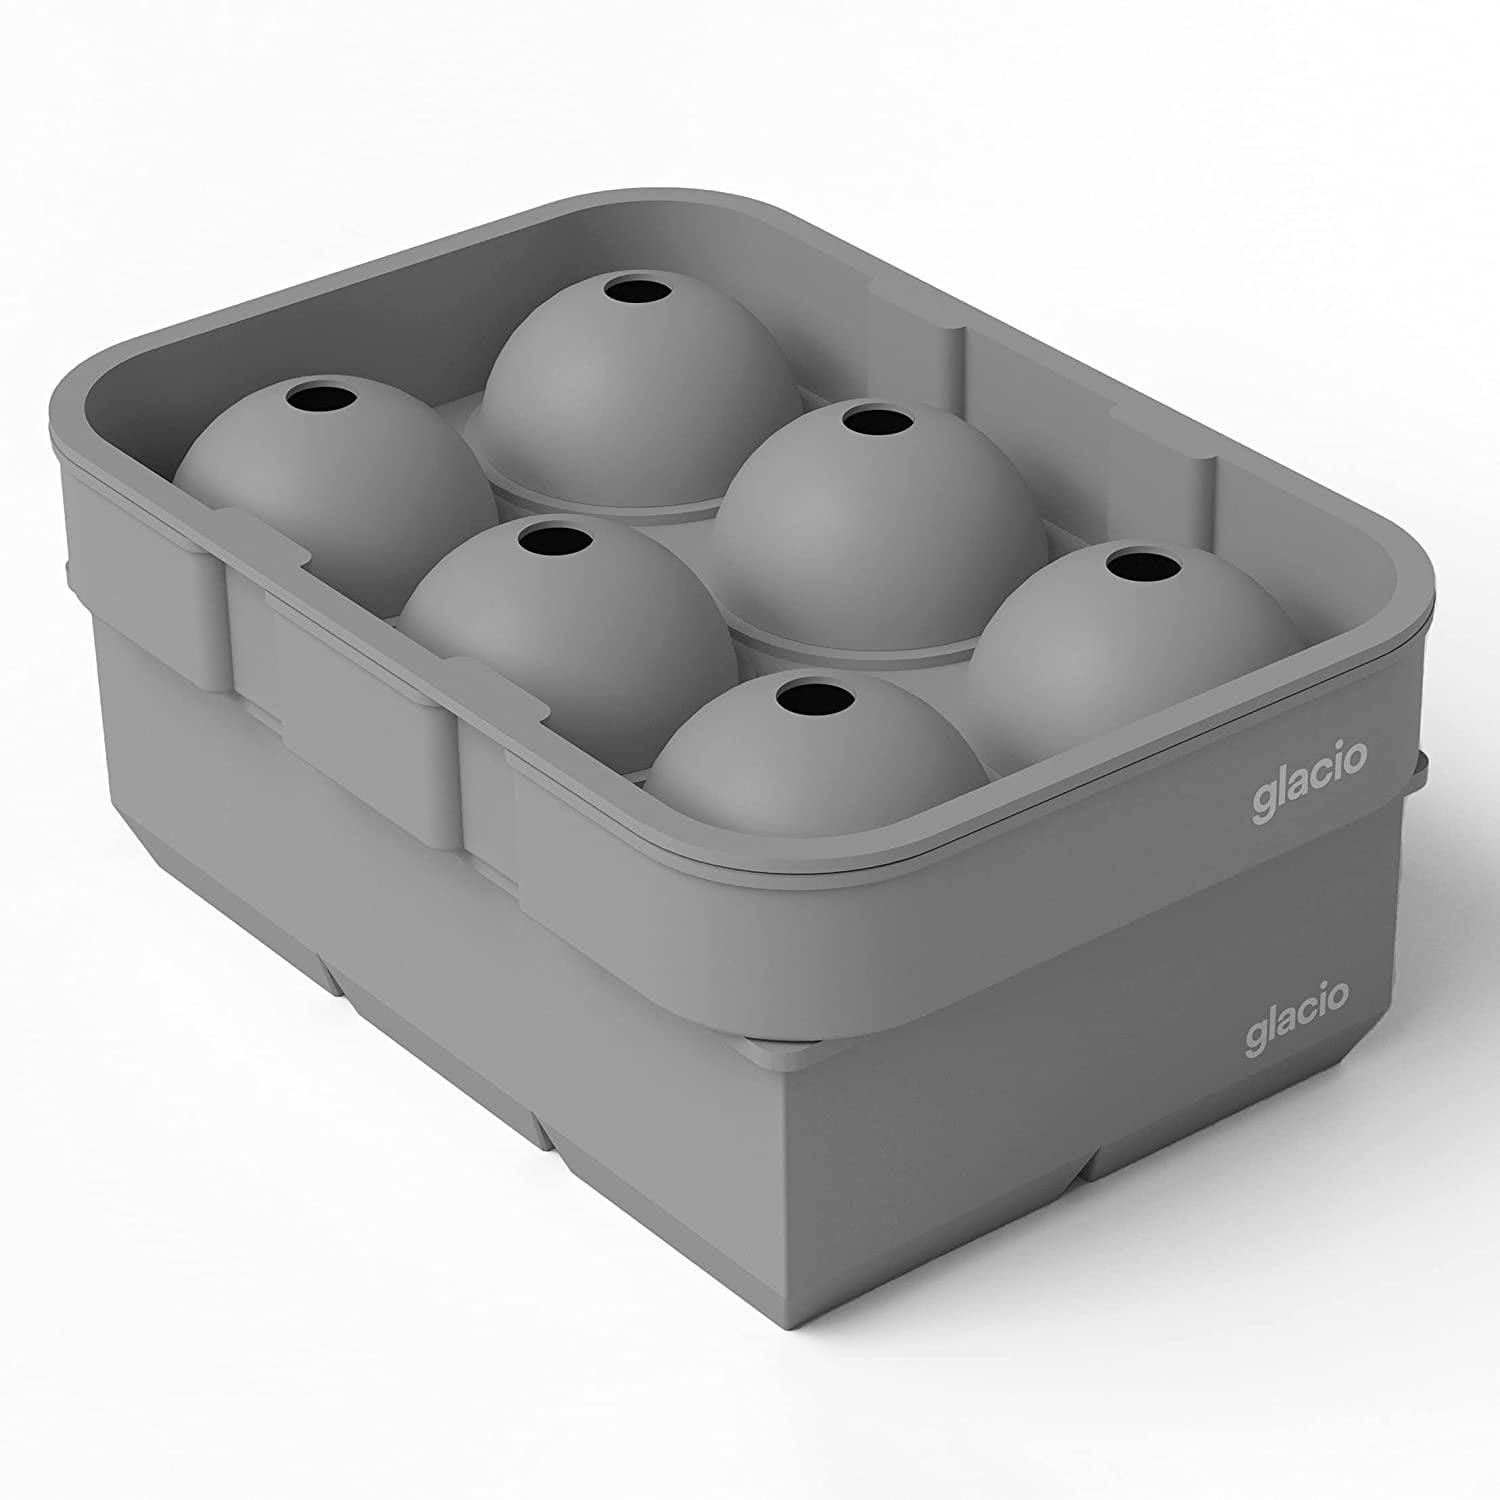 Glacio Ice Cube Molds - Jumbo Square Cube Tray with Lid and 2 Large Sphere Molds, Black